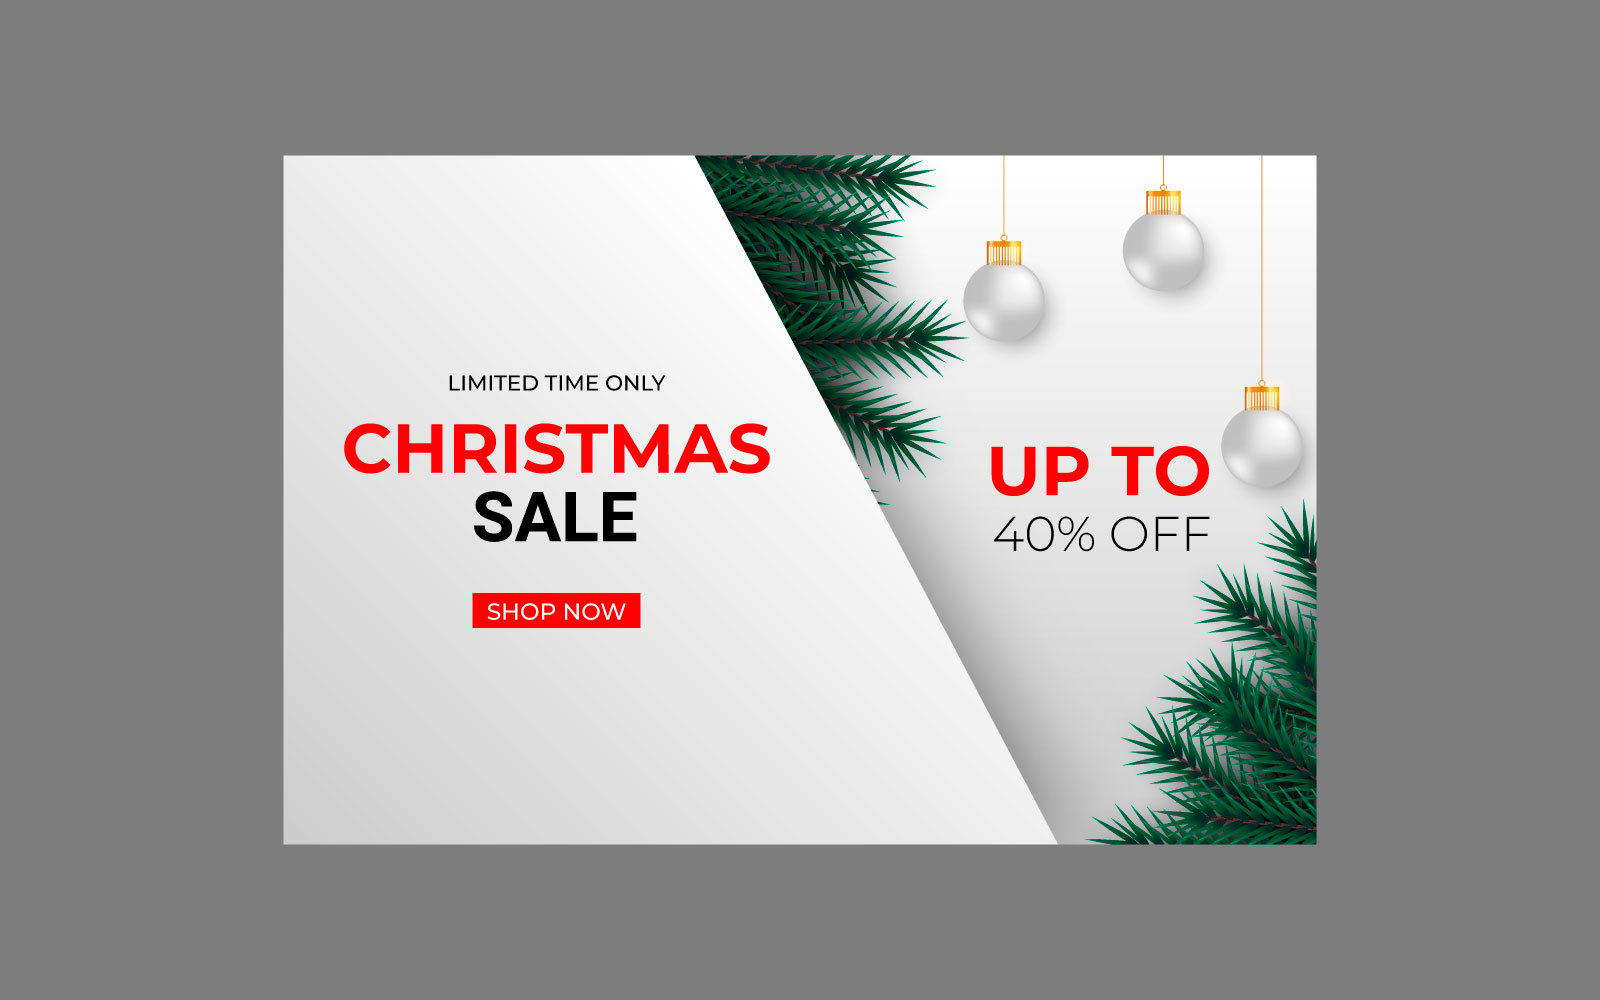 Christmas sale post social media post decoration with pine branches